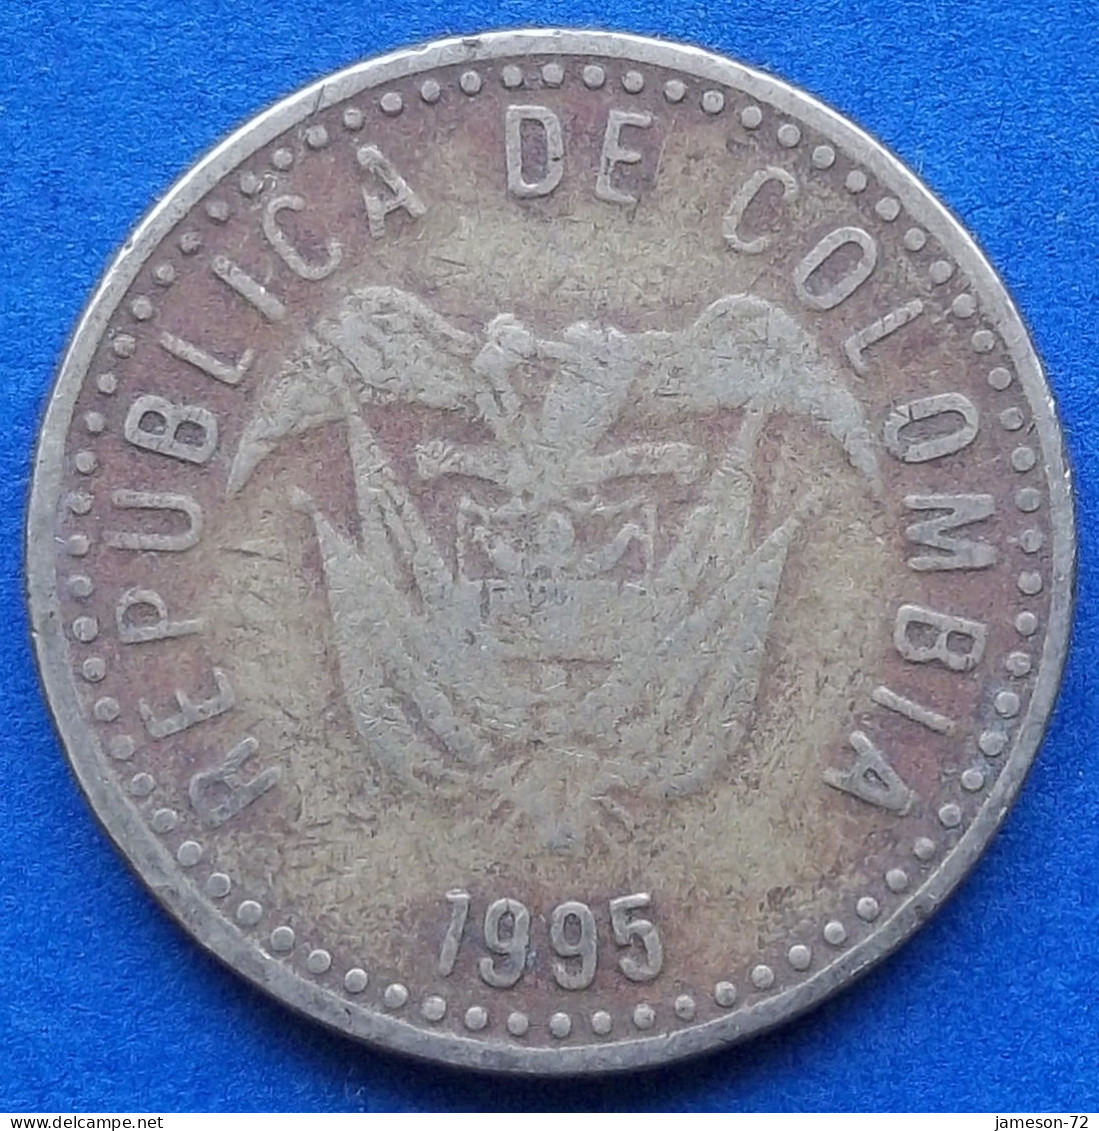 COLOMBIA - 100 Pesos 1995 KM# 285.2 Republic - Edelweiss Coins - Colombie